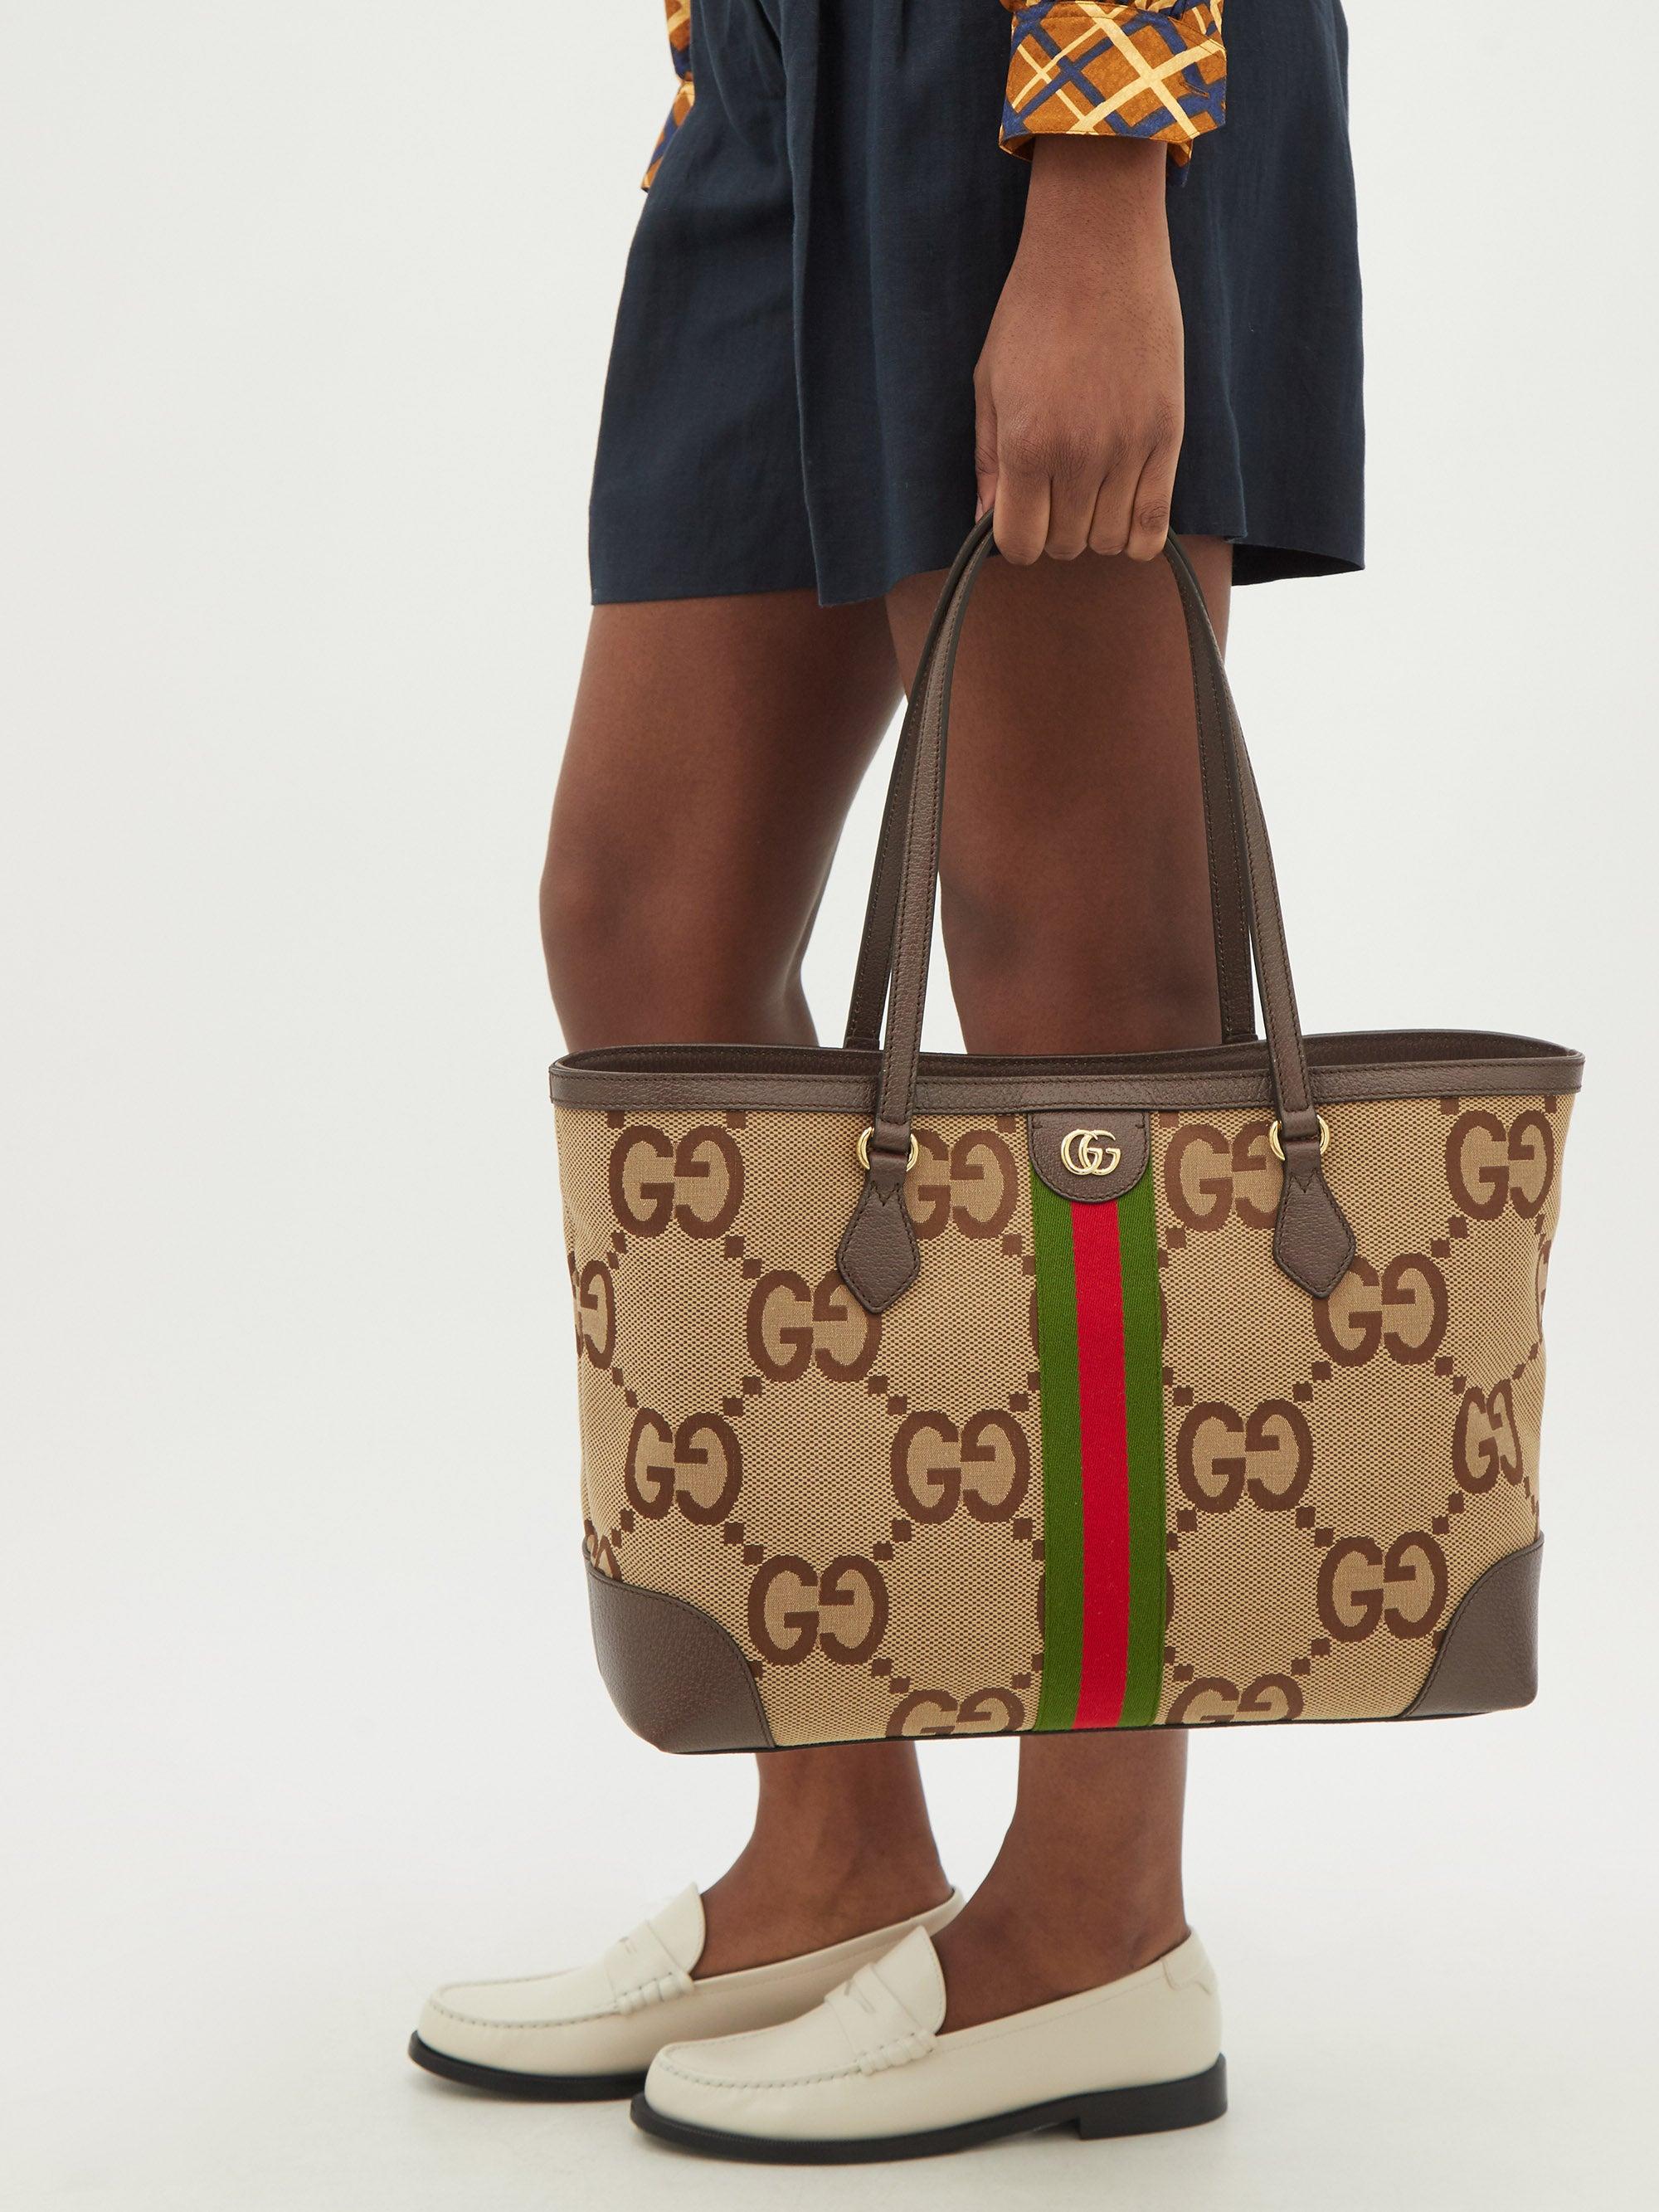 Authentic Gucci Ophidia Jumbo GG Canvas Tote Purse Brown GORGEOUS !!!